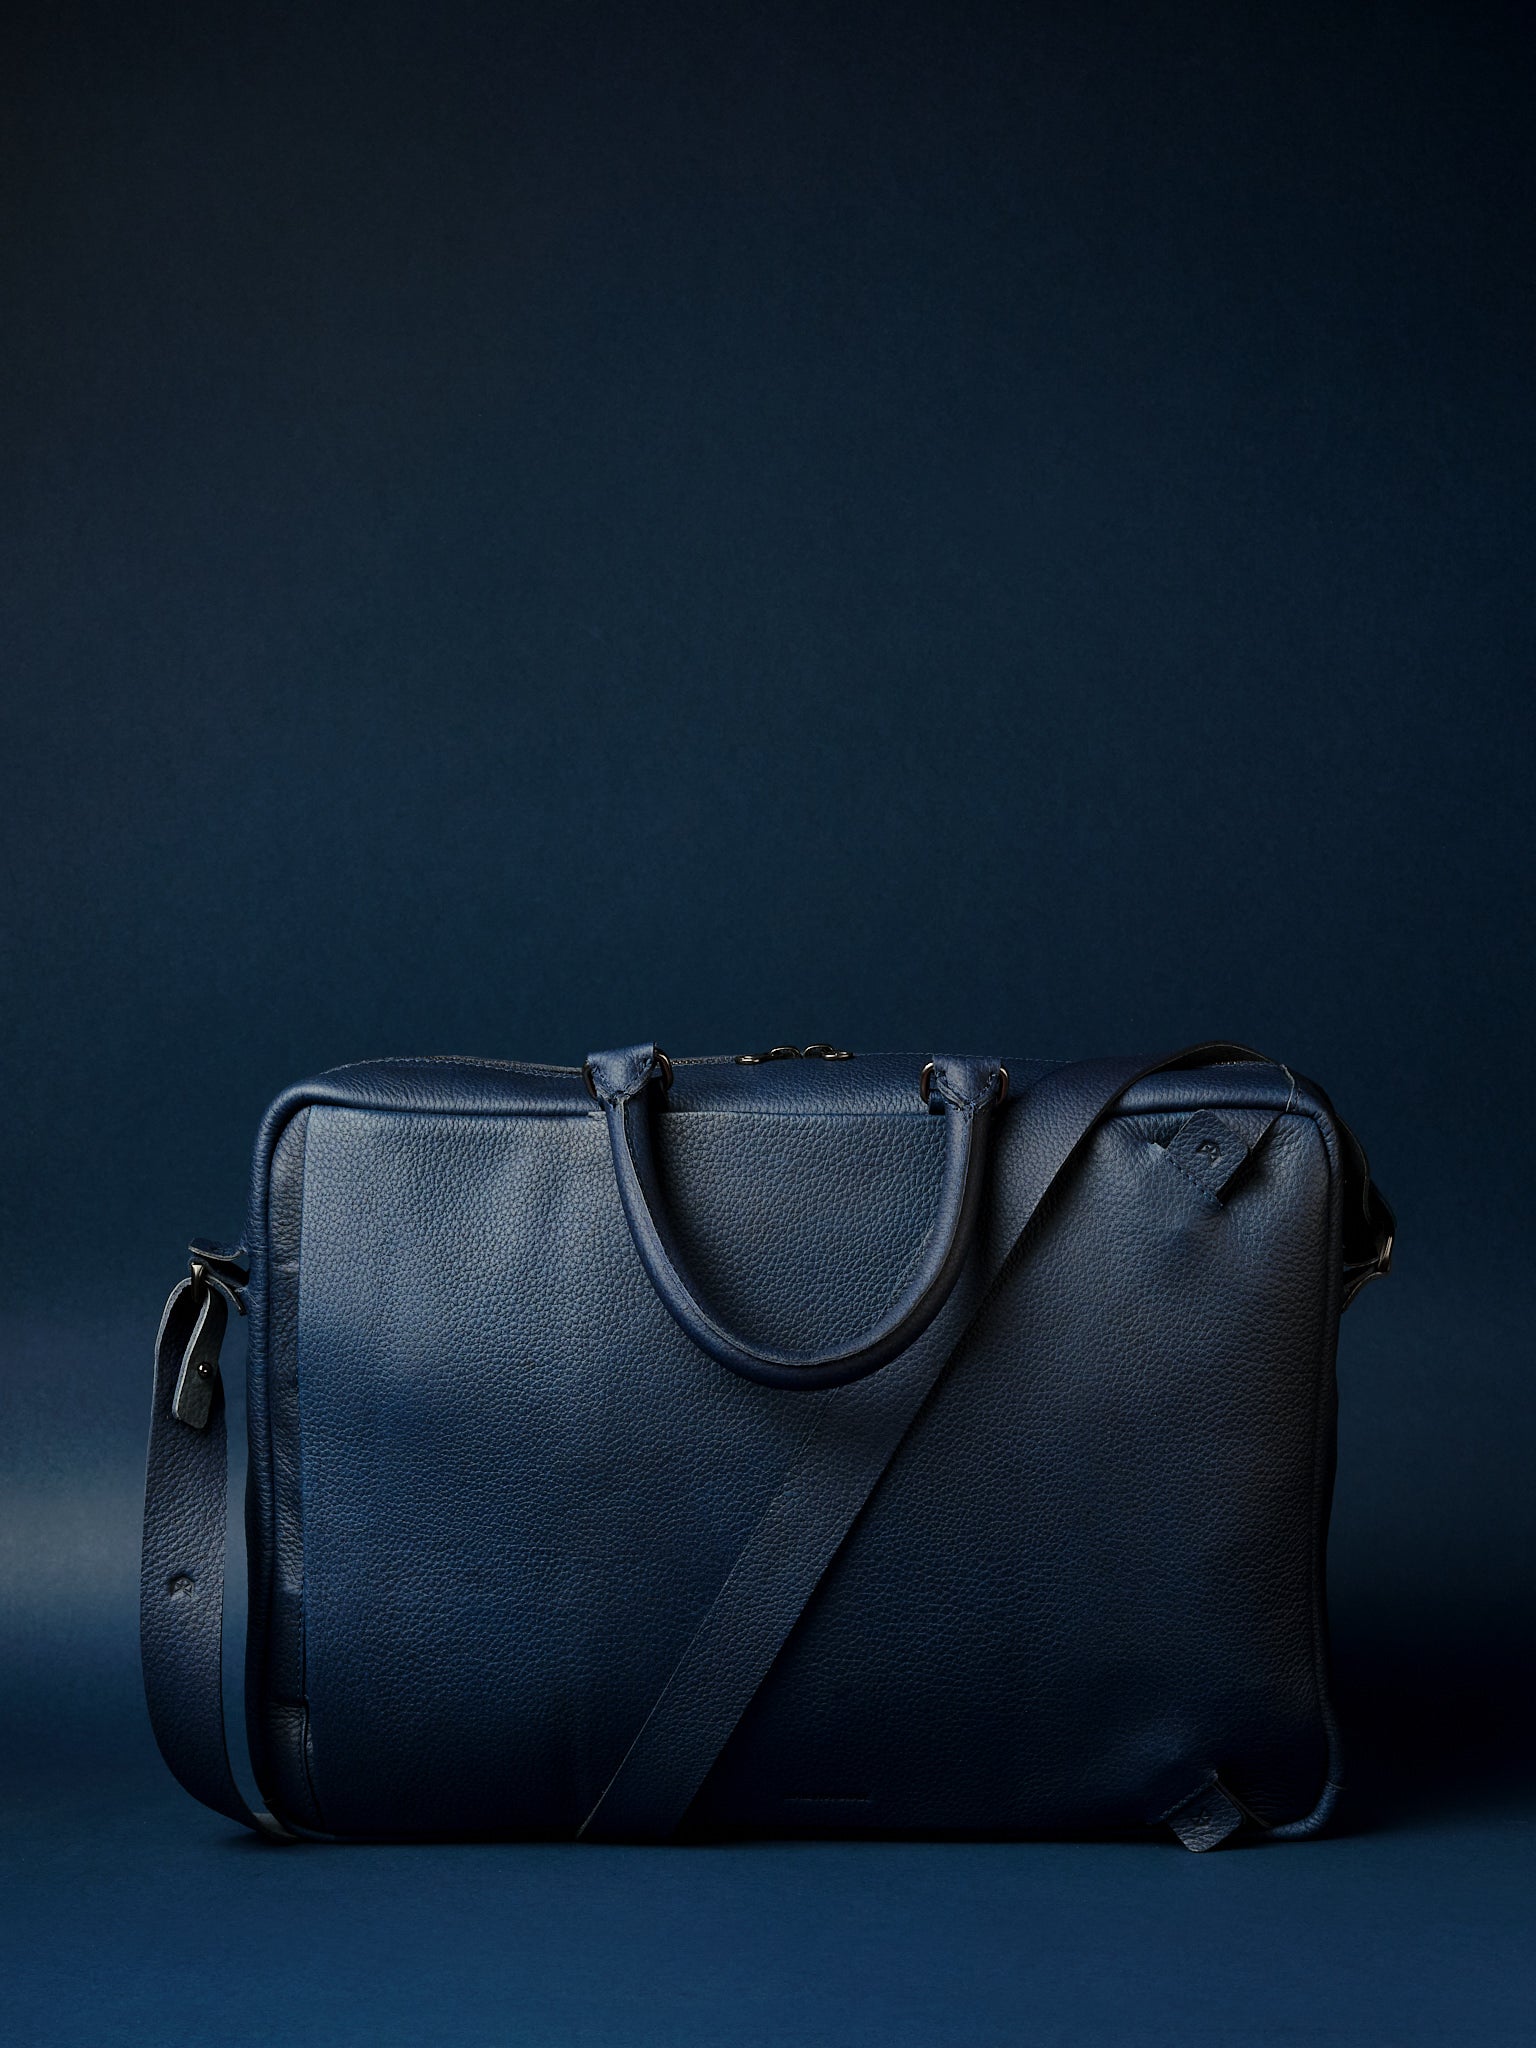 Handmade Leather Briefcase. Backpack Briefcase Combo Navy by Capra